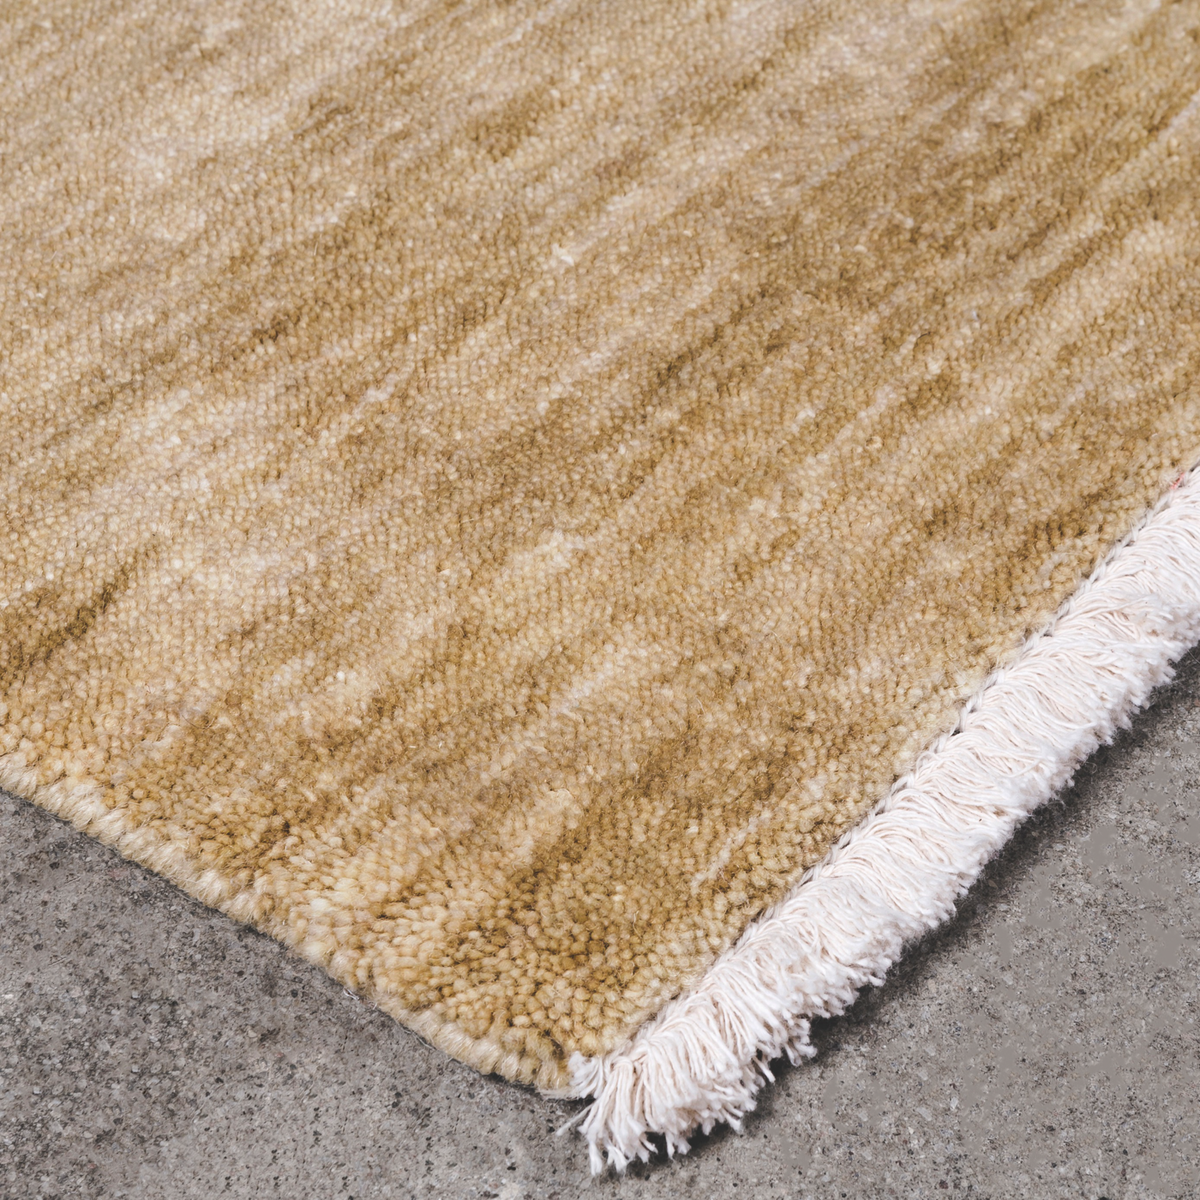 The Mkt Signature Rug Collection seamlessly blends texture, colour and detail with quality materials and artisanal craftsmanship.